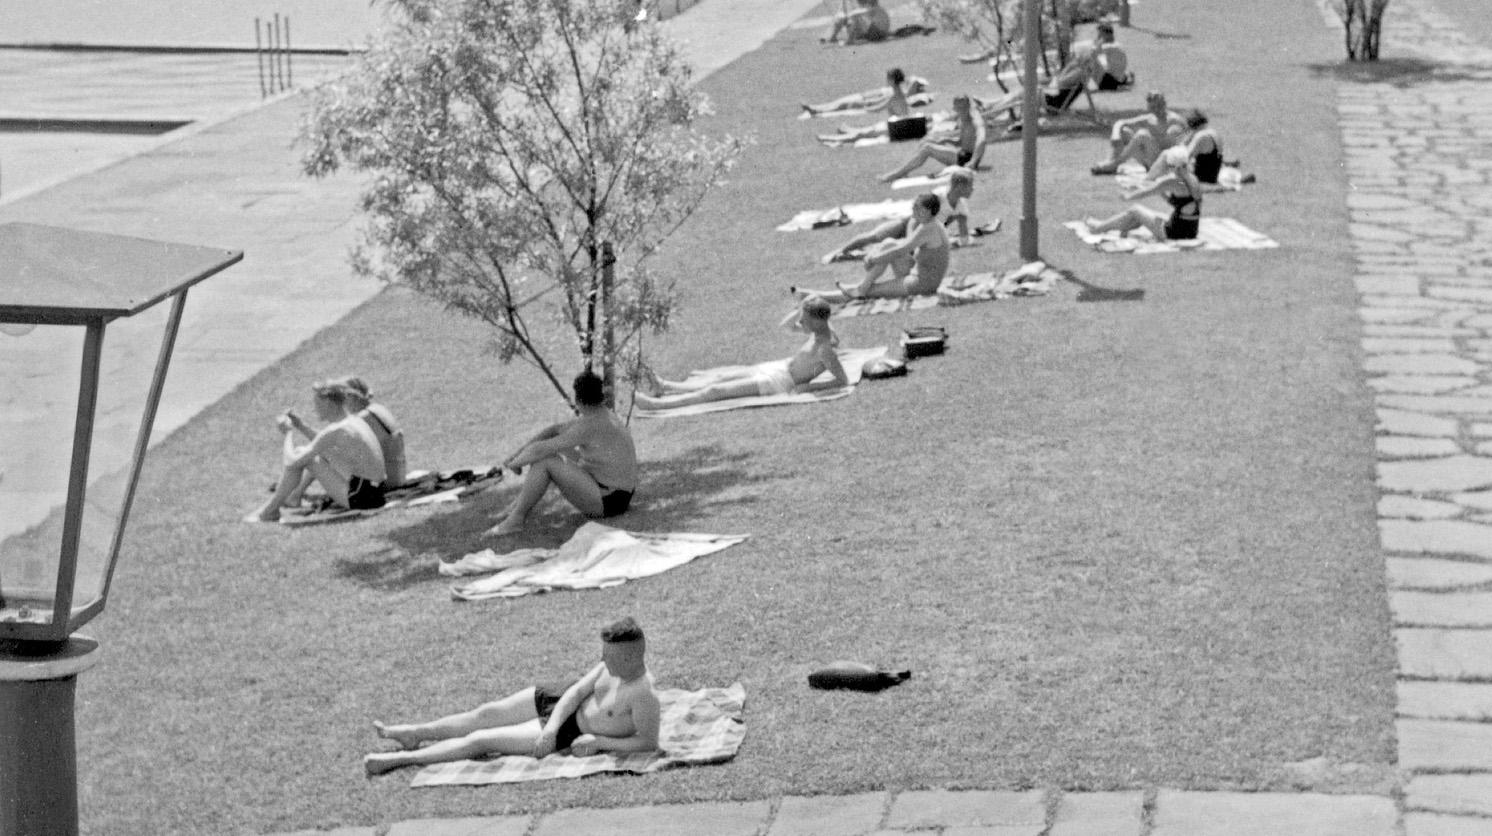 Sunbathers on the shore of Max Eyth lake, Stuttgart Germany 1935, Printed Later - Photograph by Karl Heinrich Lämmel